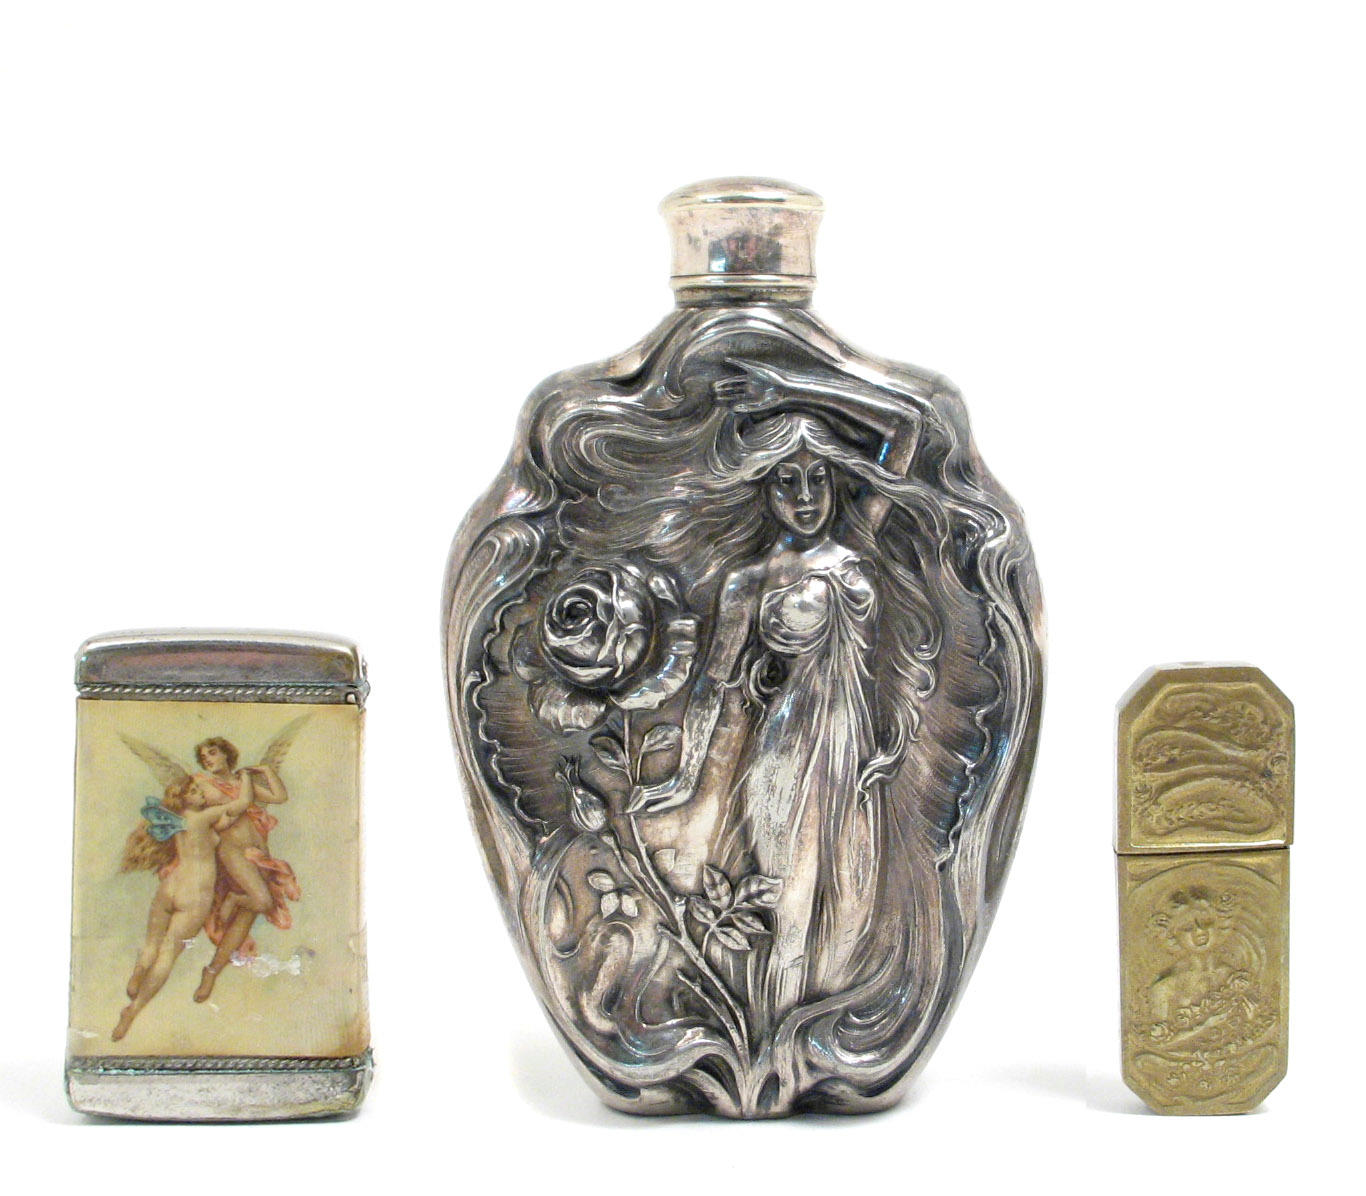 Derby Silver Co. designs in collections, at auction, and in exhibitions